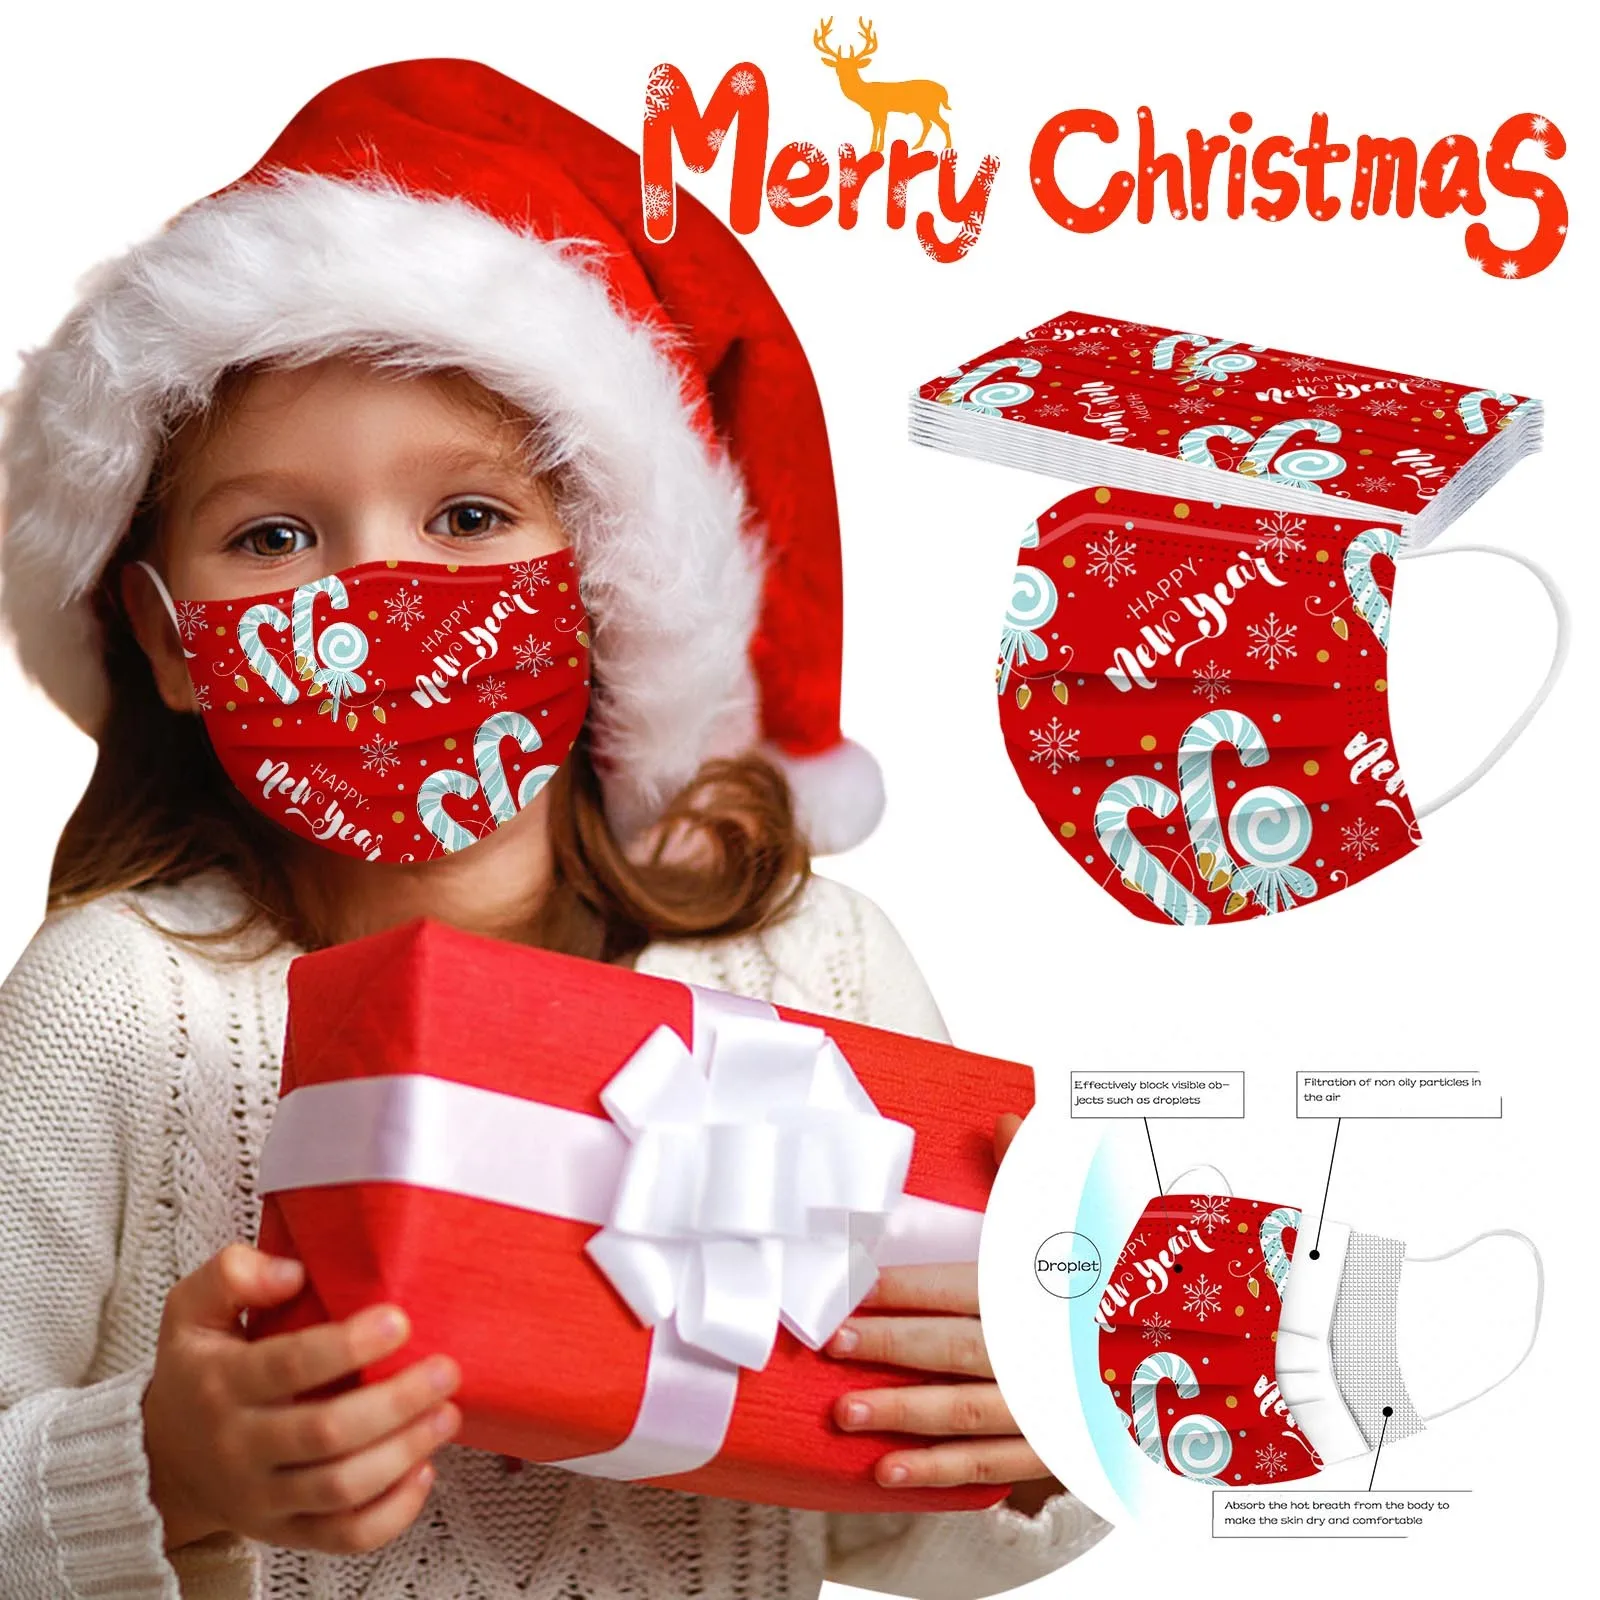 

10pc Christmas Children's Masks Disposable High Quality Mask Industrial 3ply Dustproof Filter Pm2.5 Mask Earloop Bandage Masque